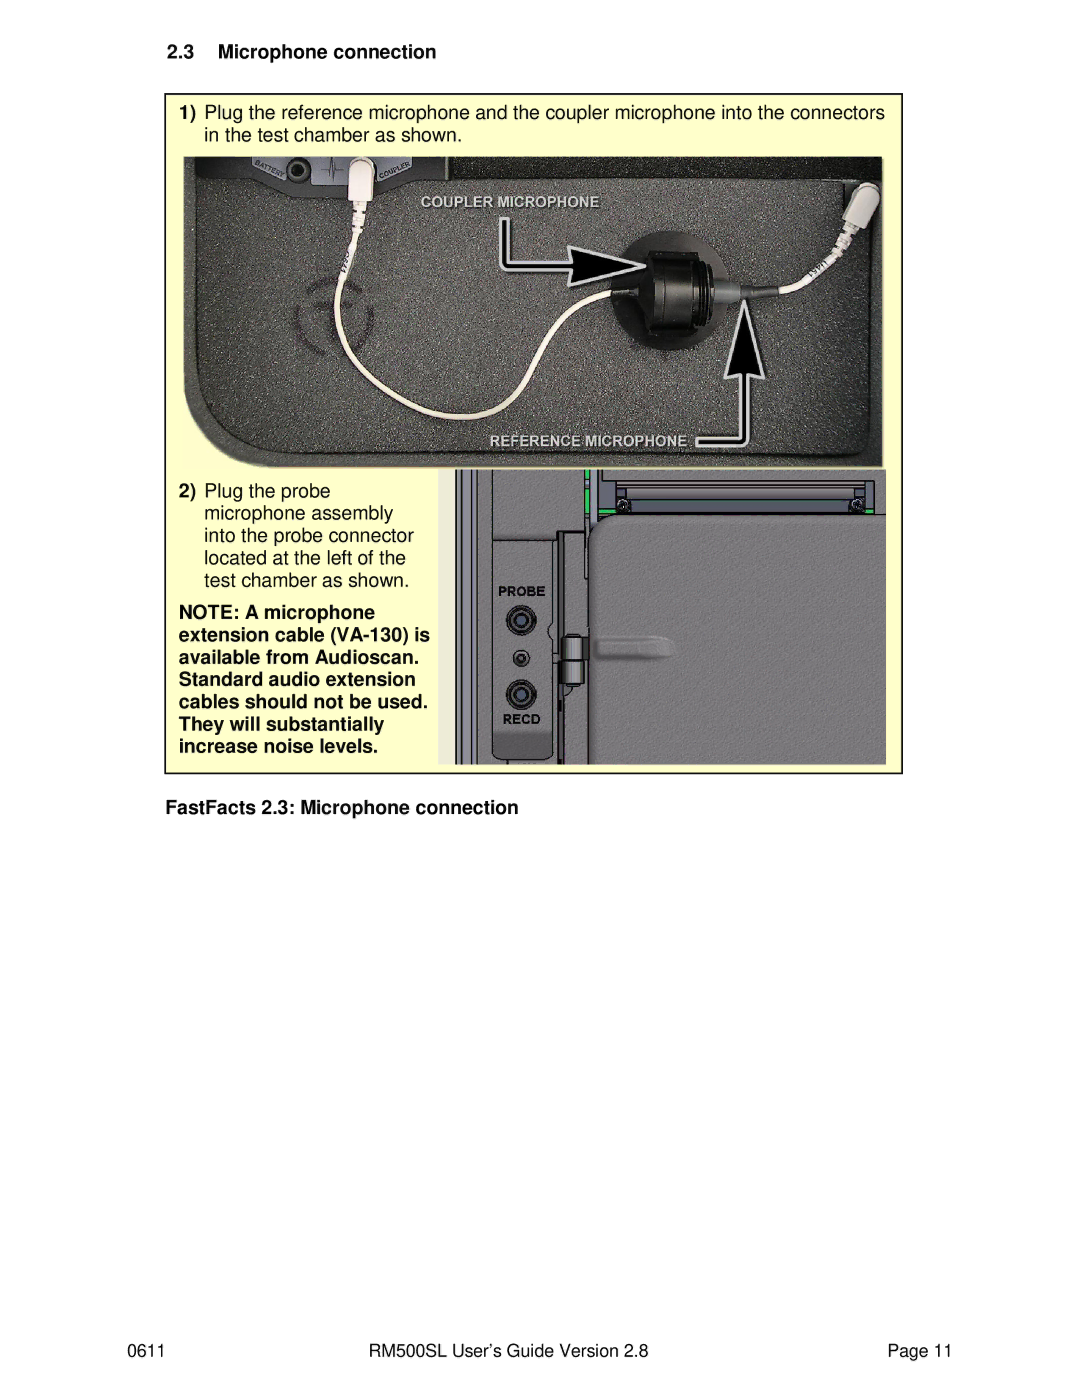 HP RM500SL manual FastFacts 2.3 Microphone connection 